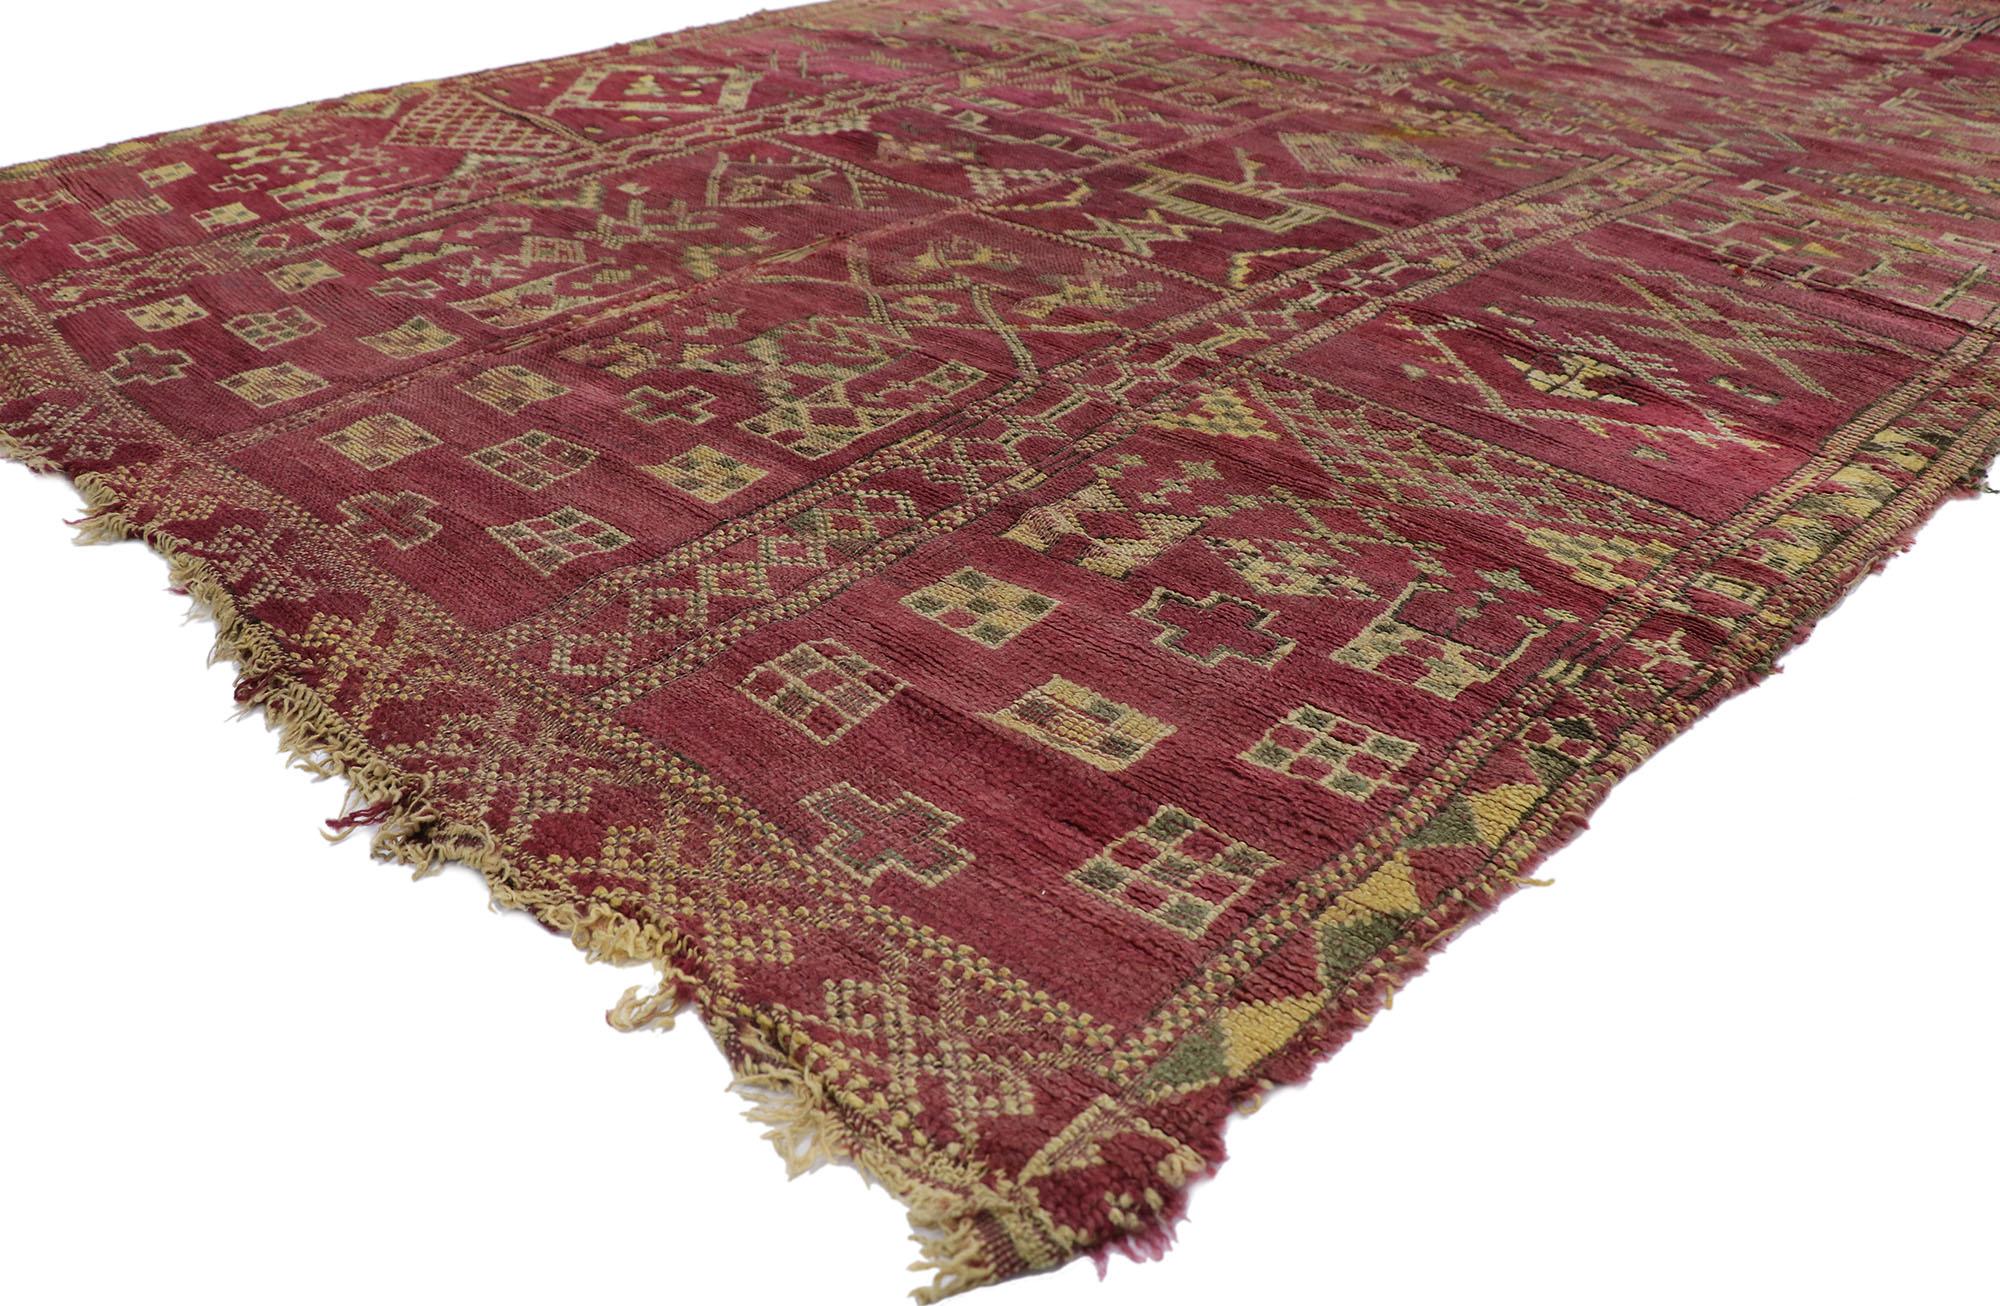 21266 Distressed Vintage Berber Moroccan Rug, 06'08 x 11'00.
Weathered beauty meets boho bungalow in this hand-knotted wool vintage Moroccan rug. The distinctive tribal elements and zesty earth-tone colors woven into this piece work together